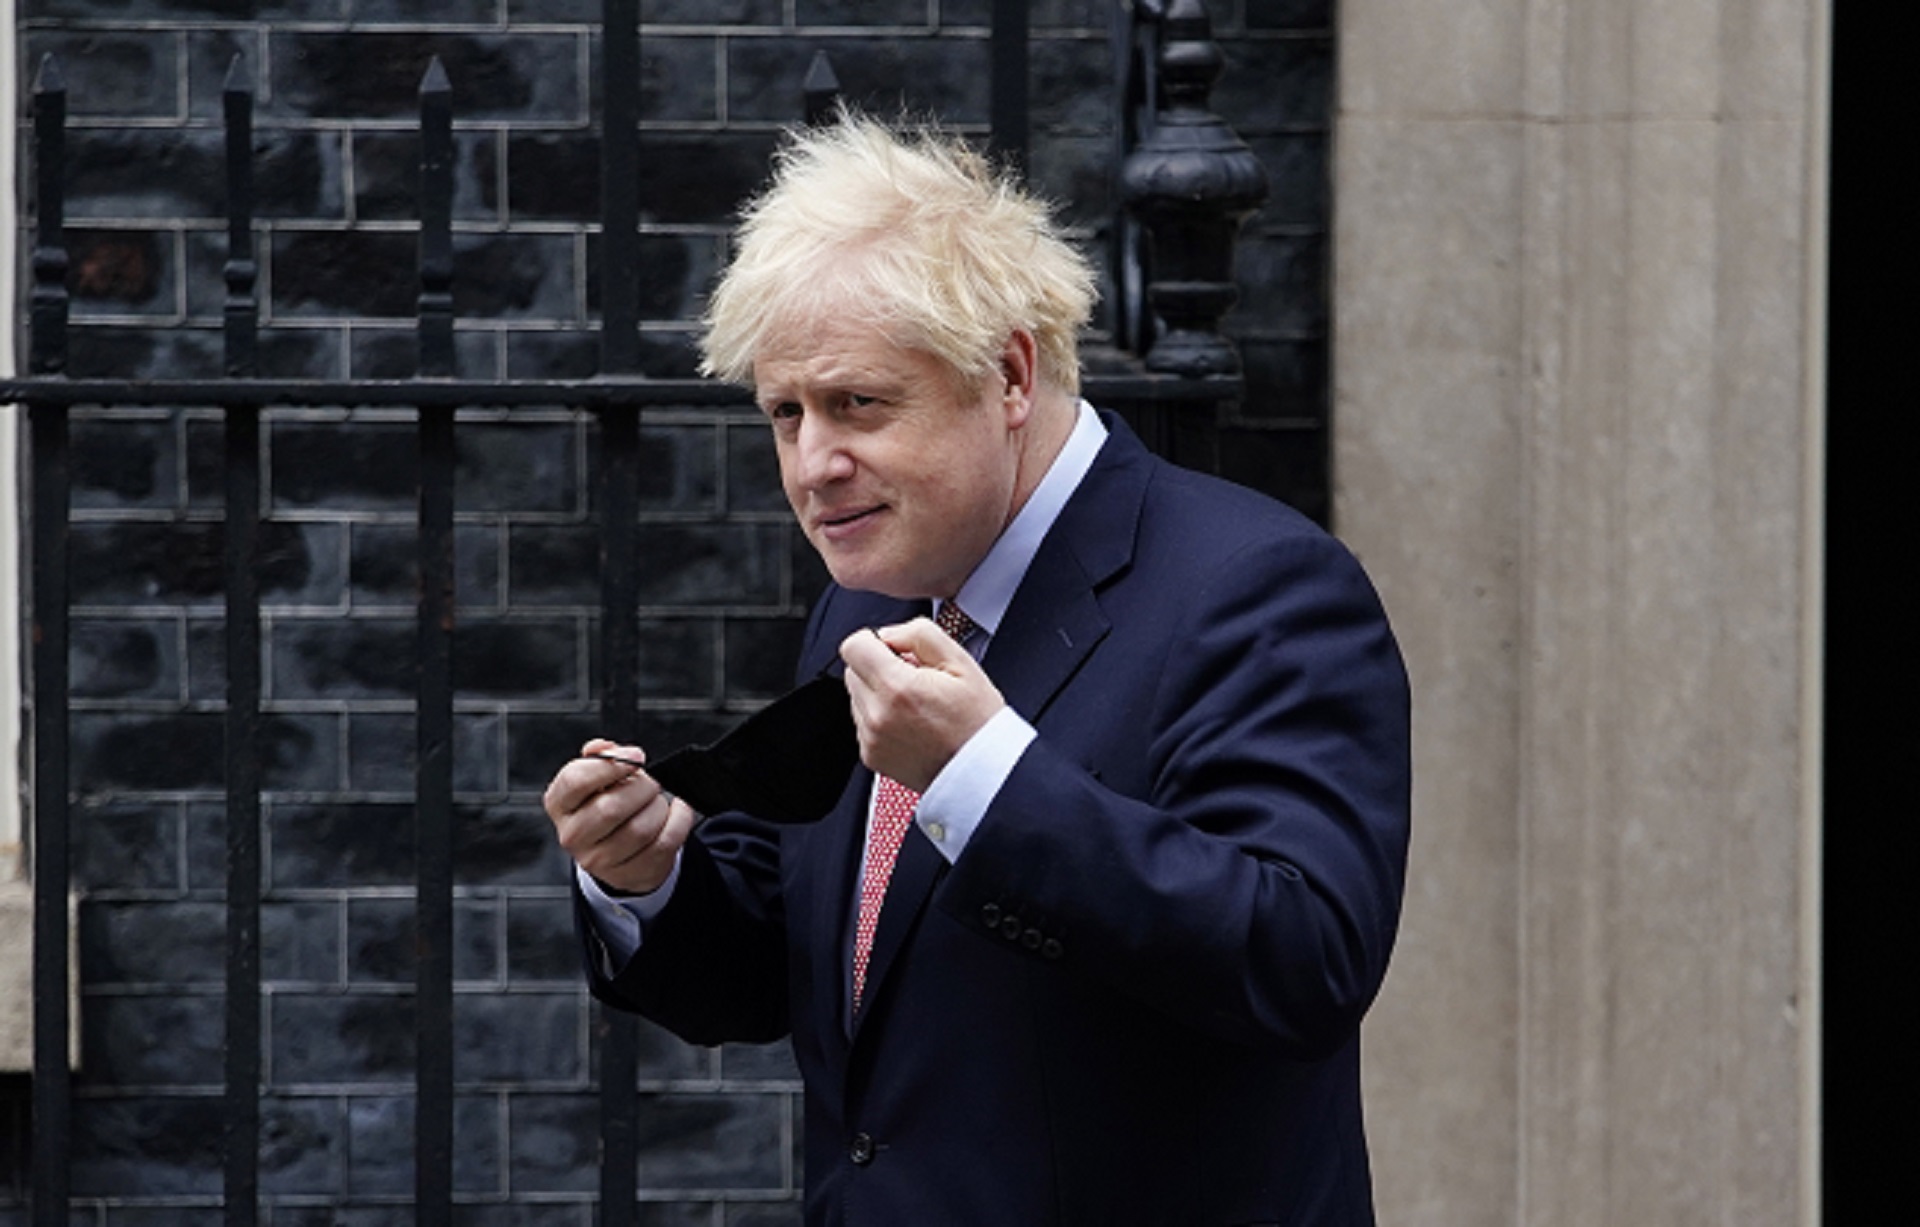 epa08723622 British Prime Minister Boris Johnson leaves 10 Downing Street in London, Britain, 06 October 2020. Johnson is to attend the Conservative Party Conference, which is held in a virtual format due to Covid-19, and deliver a leader's speech to party members.  EPA/WILL OLIVER